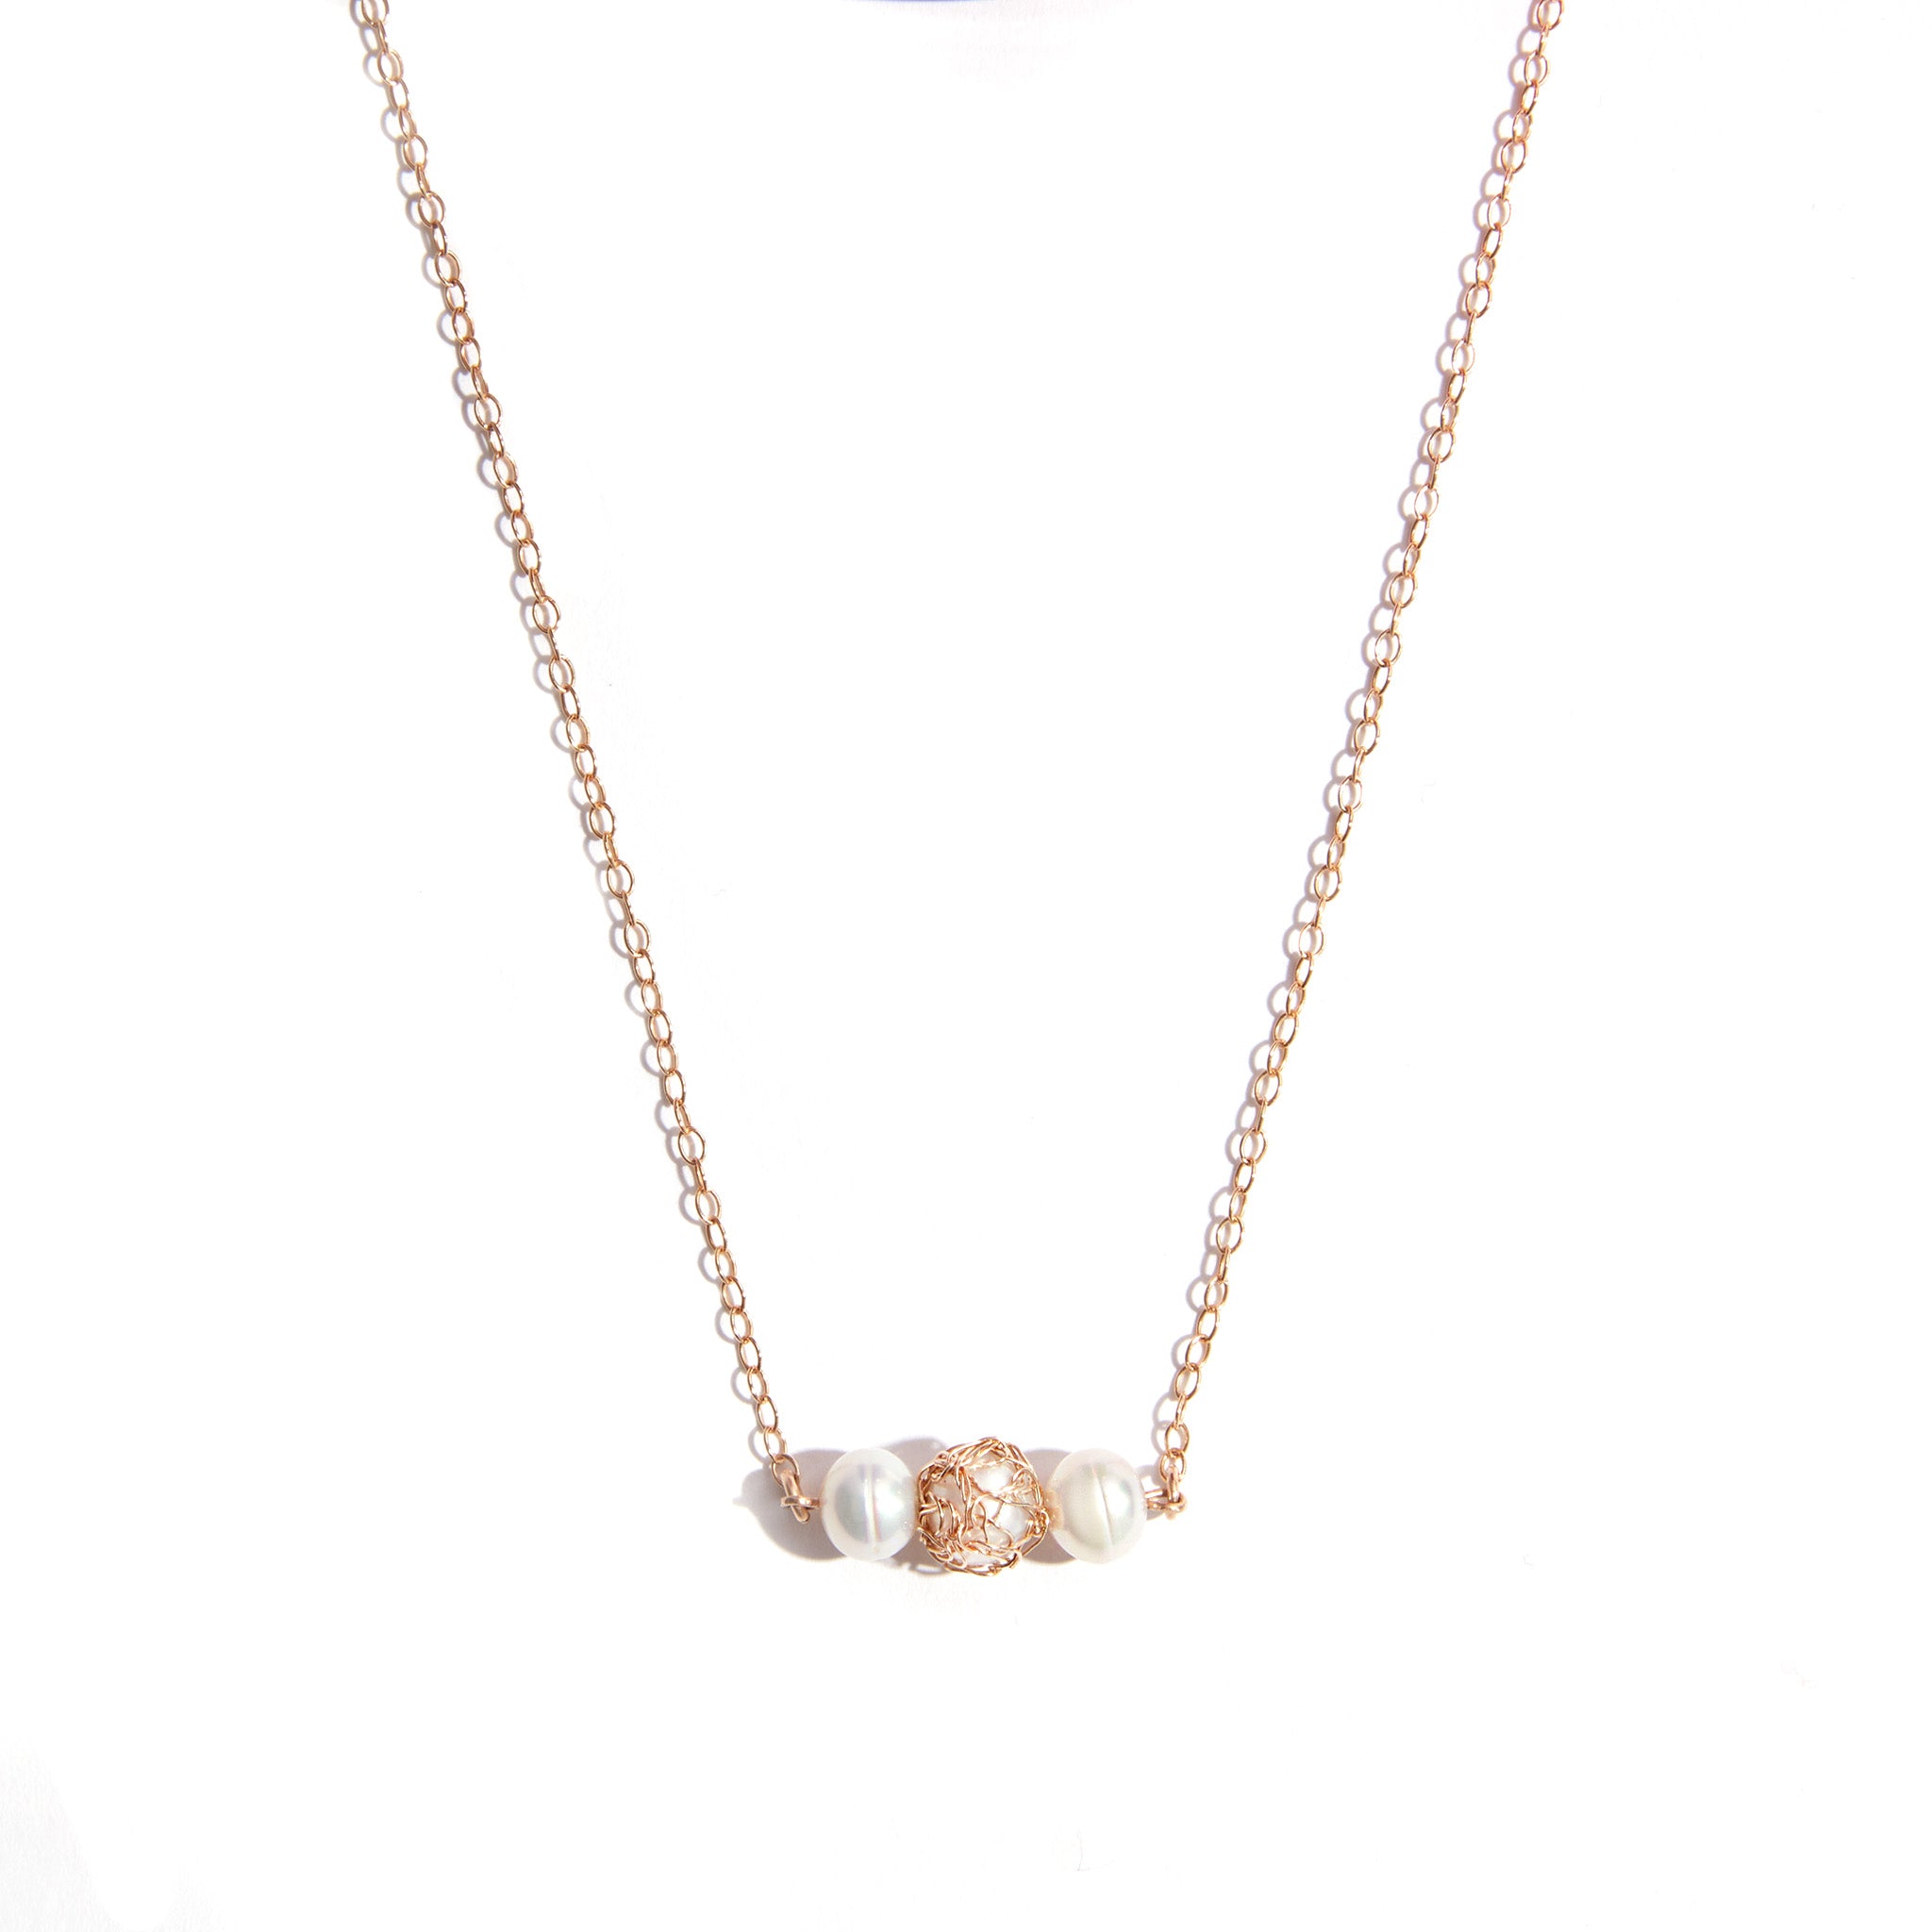 Gold Filled Pearl Knitted Necklace featuring three lustrous 6mm pearls. Crafted with high-quality gold-filled material for durability and long-lasting shine. Central detail highlights a hand-knitted pearl, complemented by additional pearls and gemstones for an extra touch of allure.